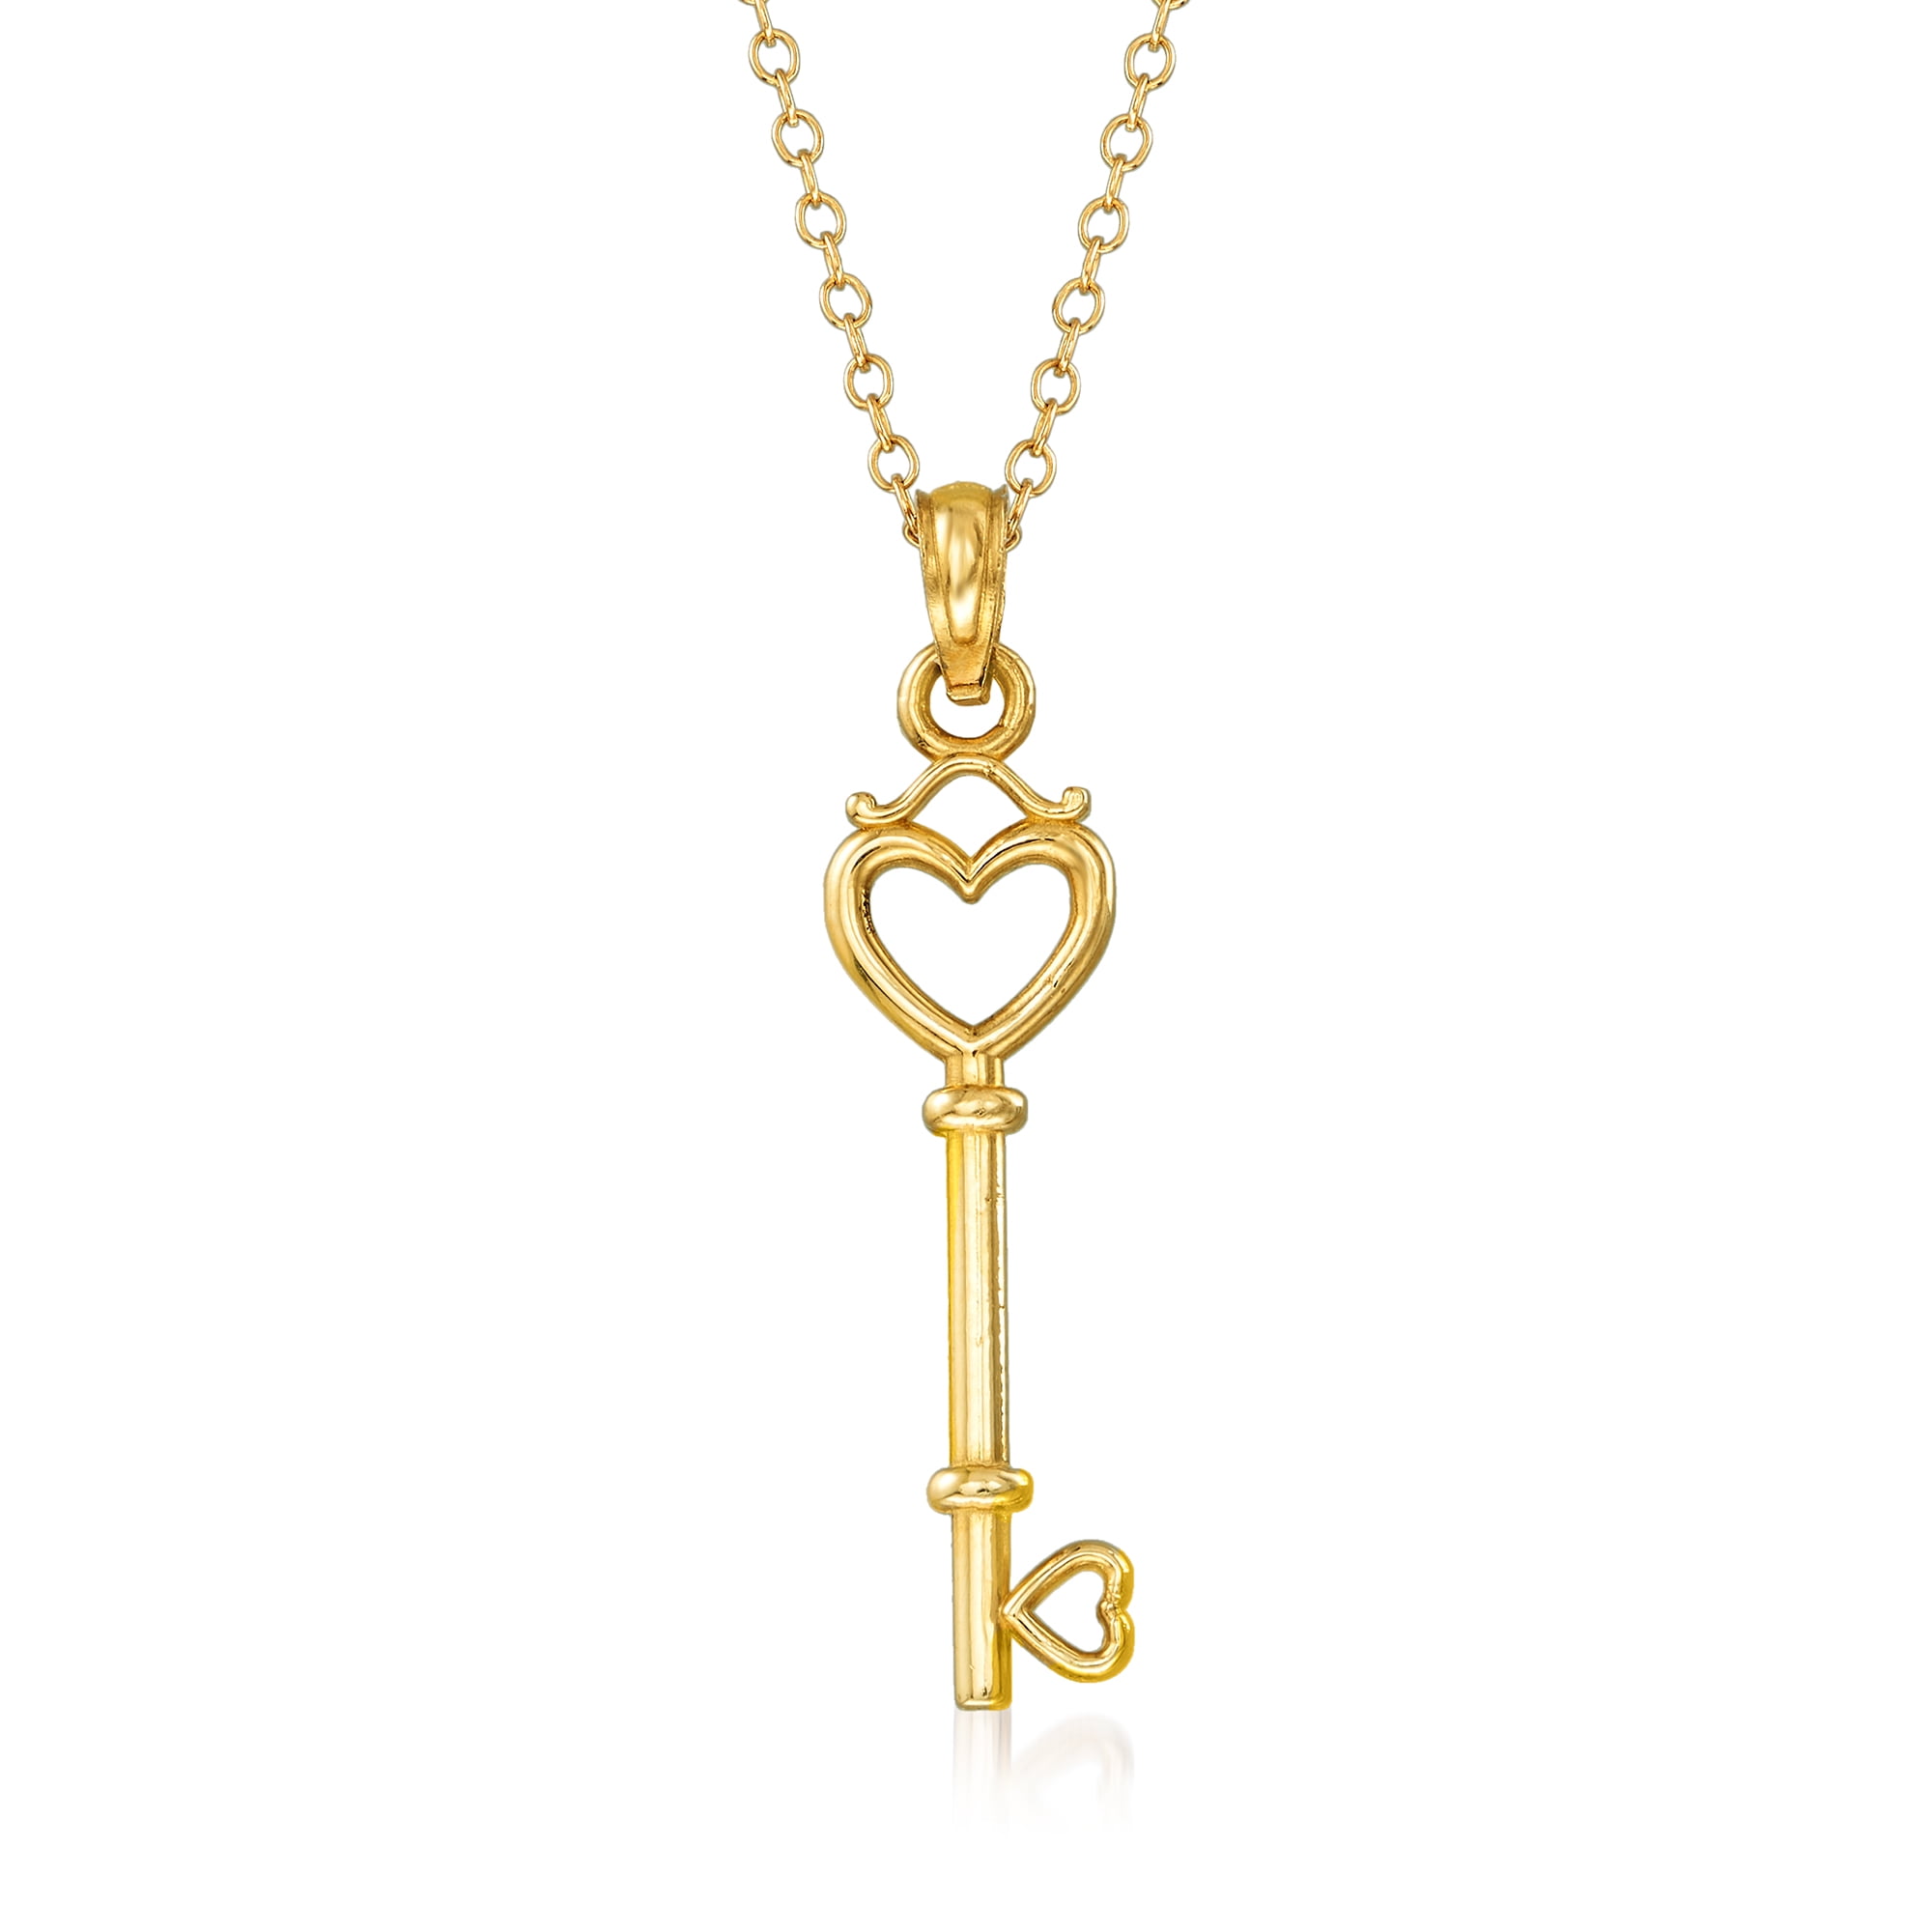 Simon G Heart Lock and Key Necklace — HAUSER'S JEWELERS